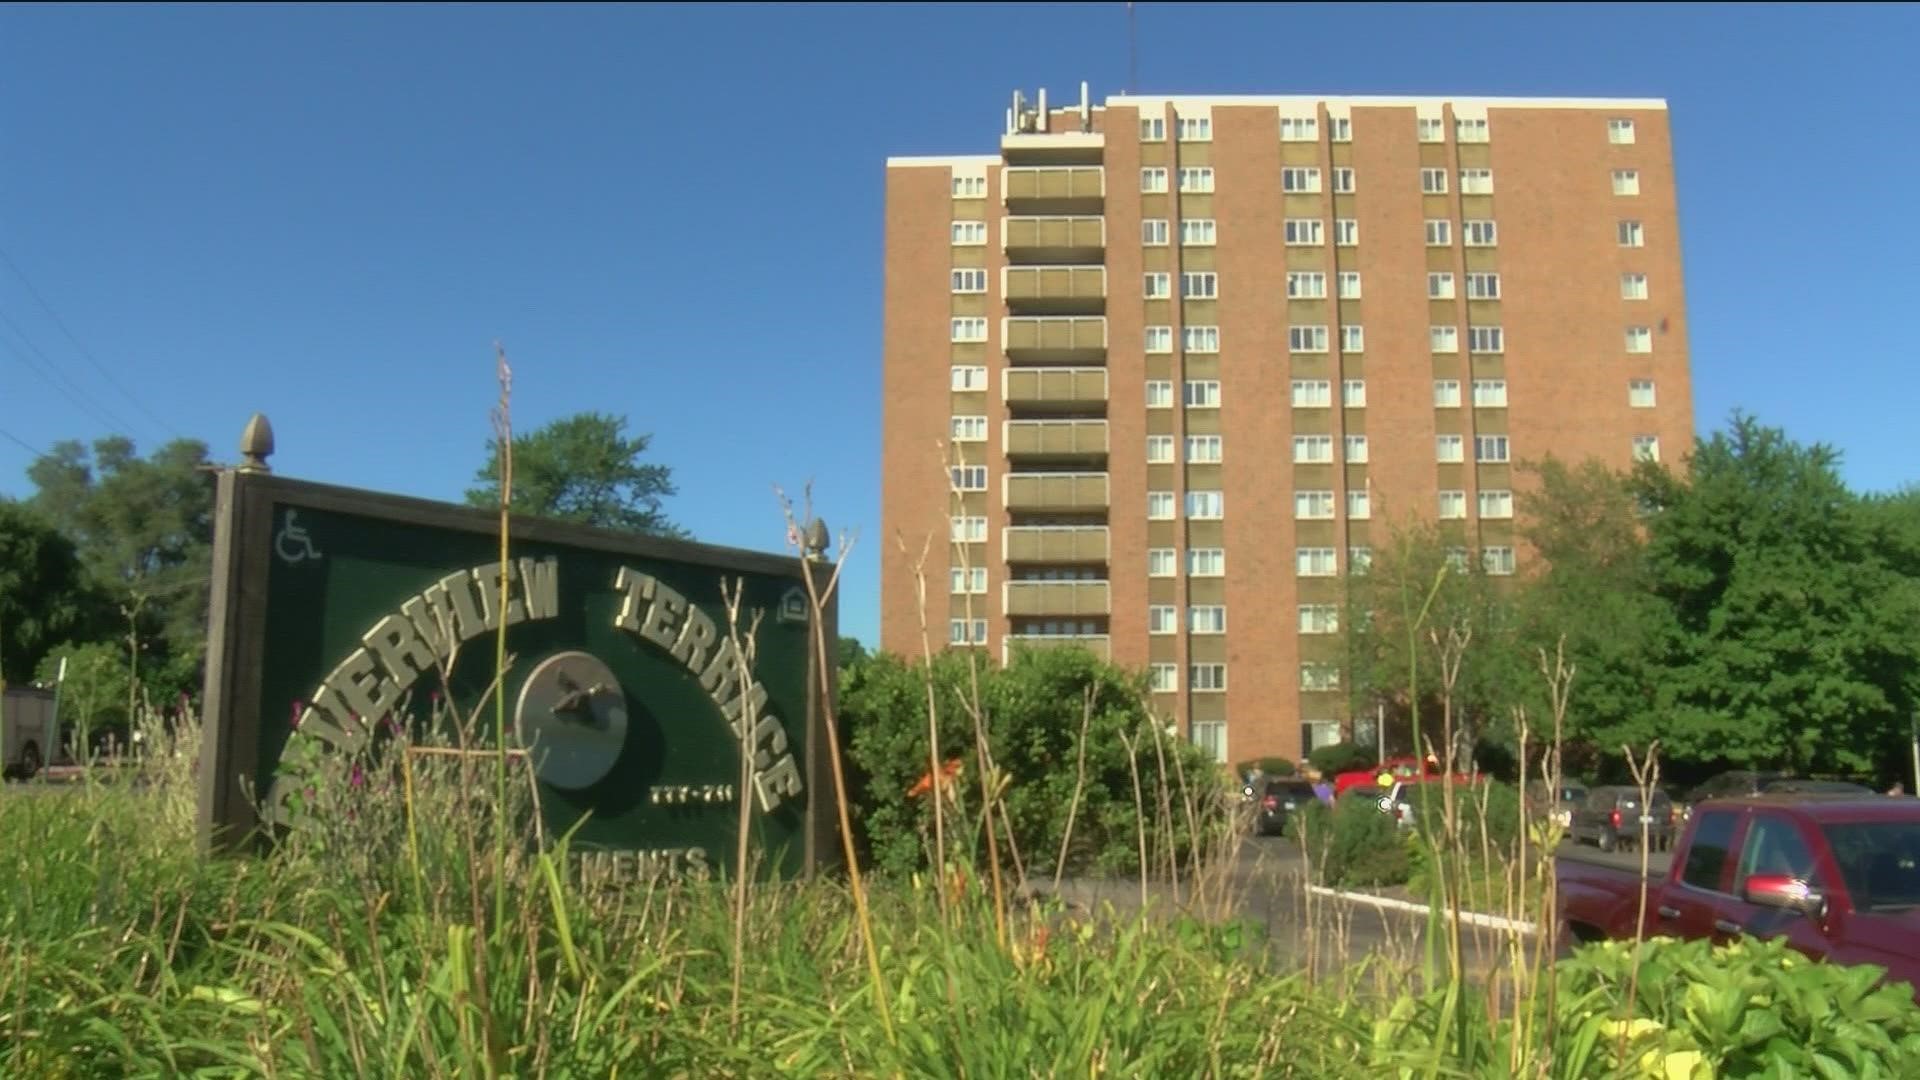 Some residents are being moved to a new hotel to stay at for the next two weeks, but after that, they don't know what their living situation holds.